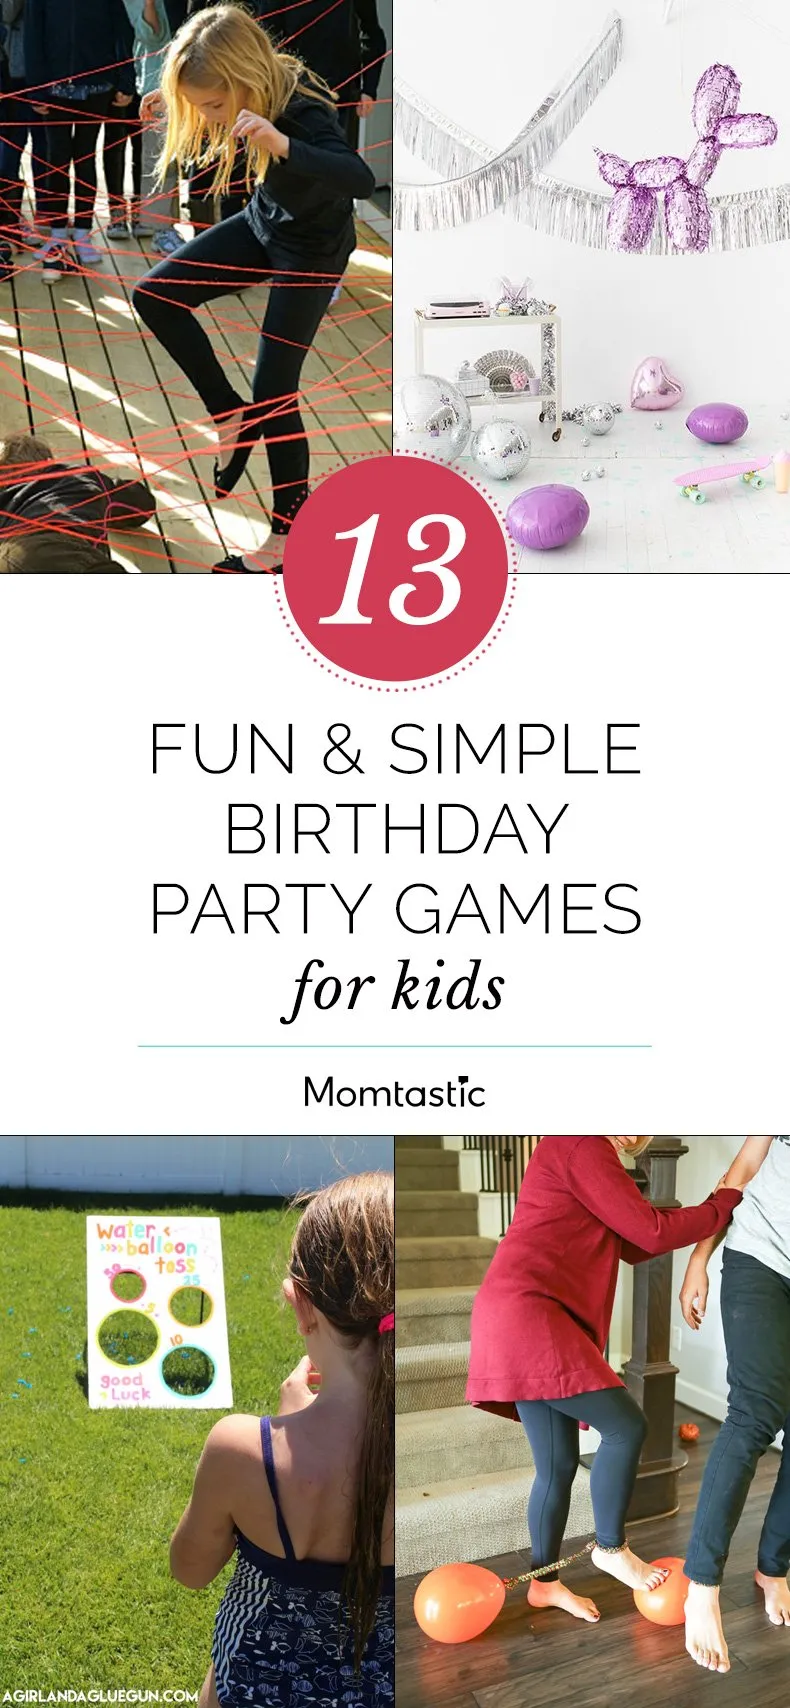 13 Fun & Simple Birthday Party Games For Kids